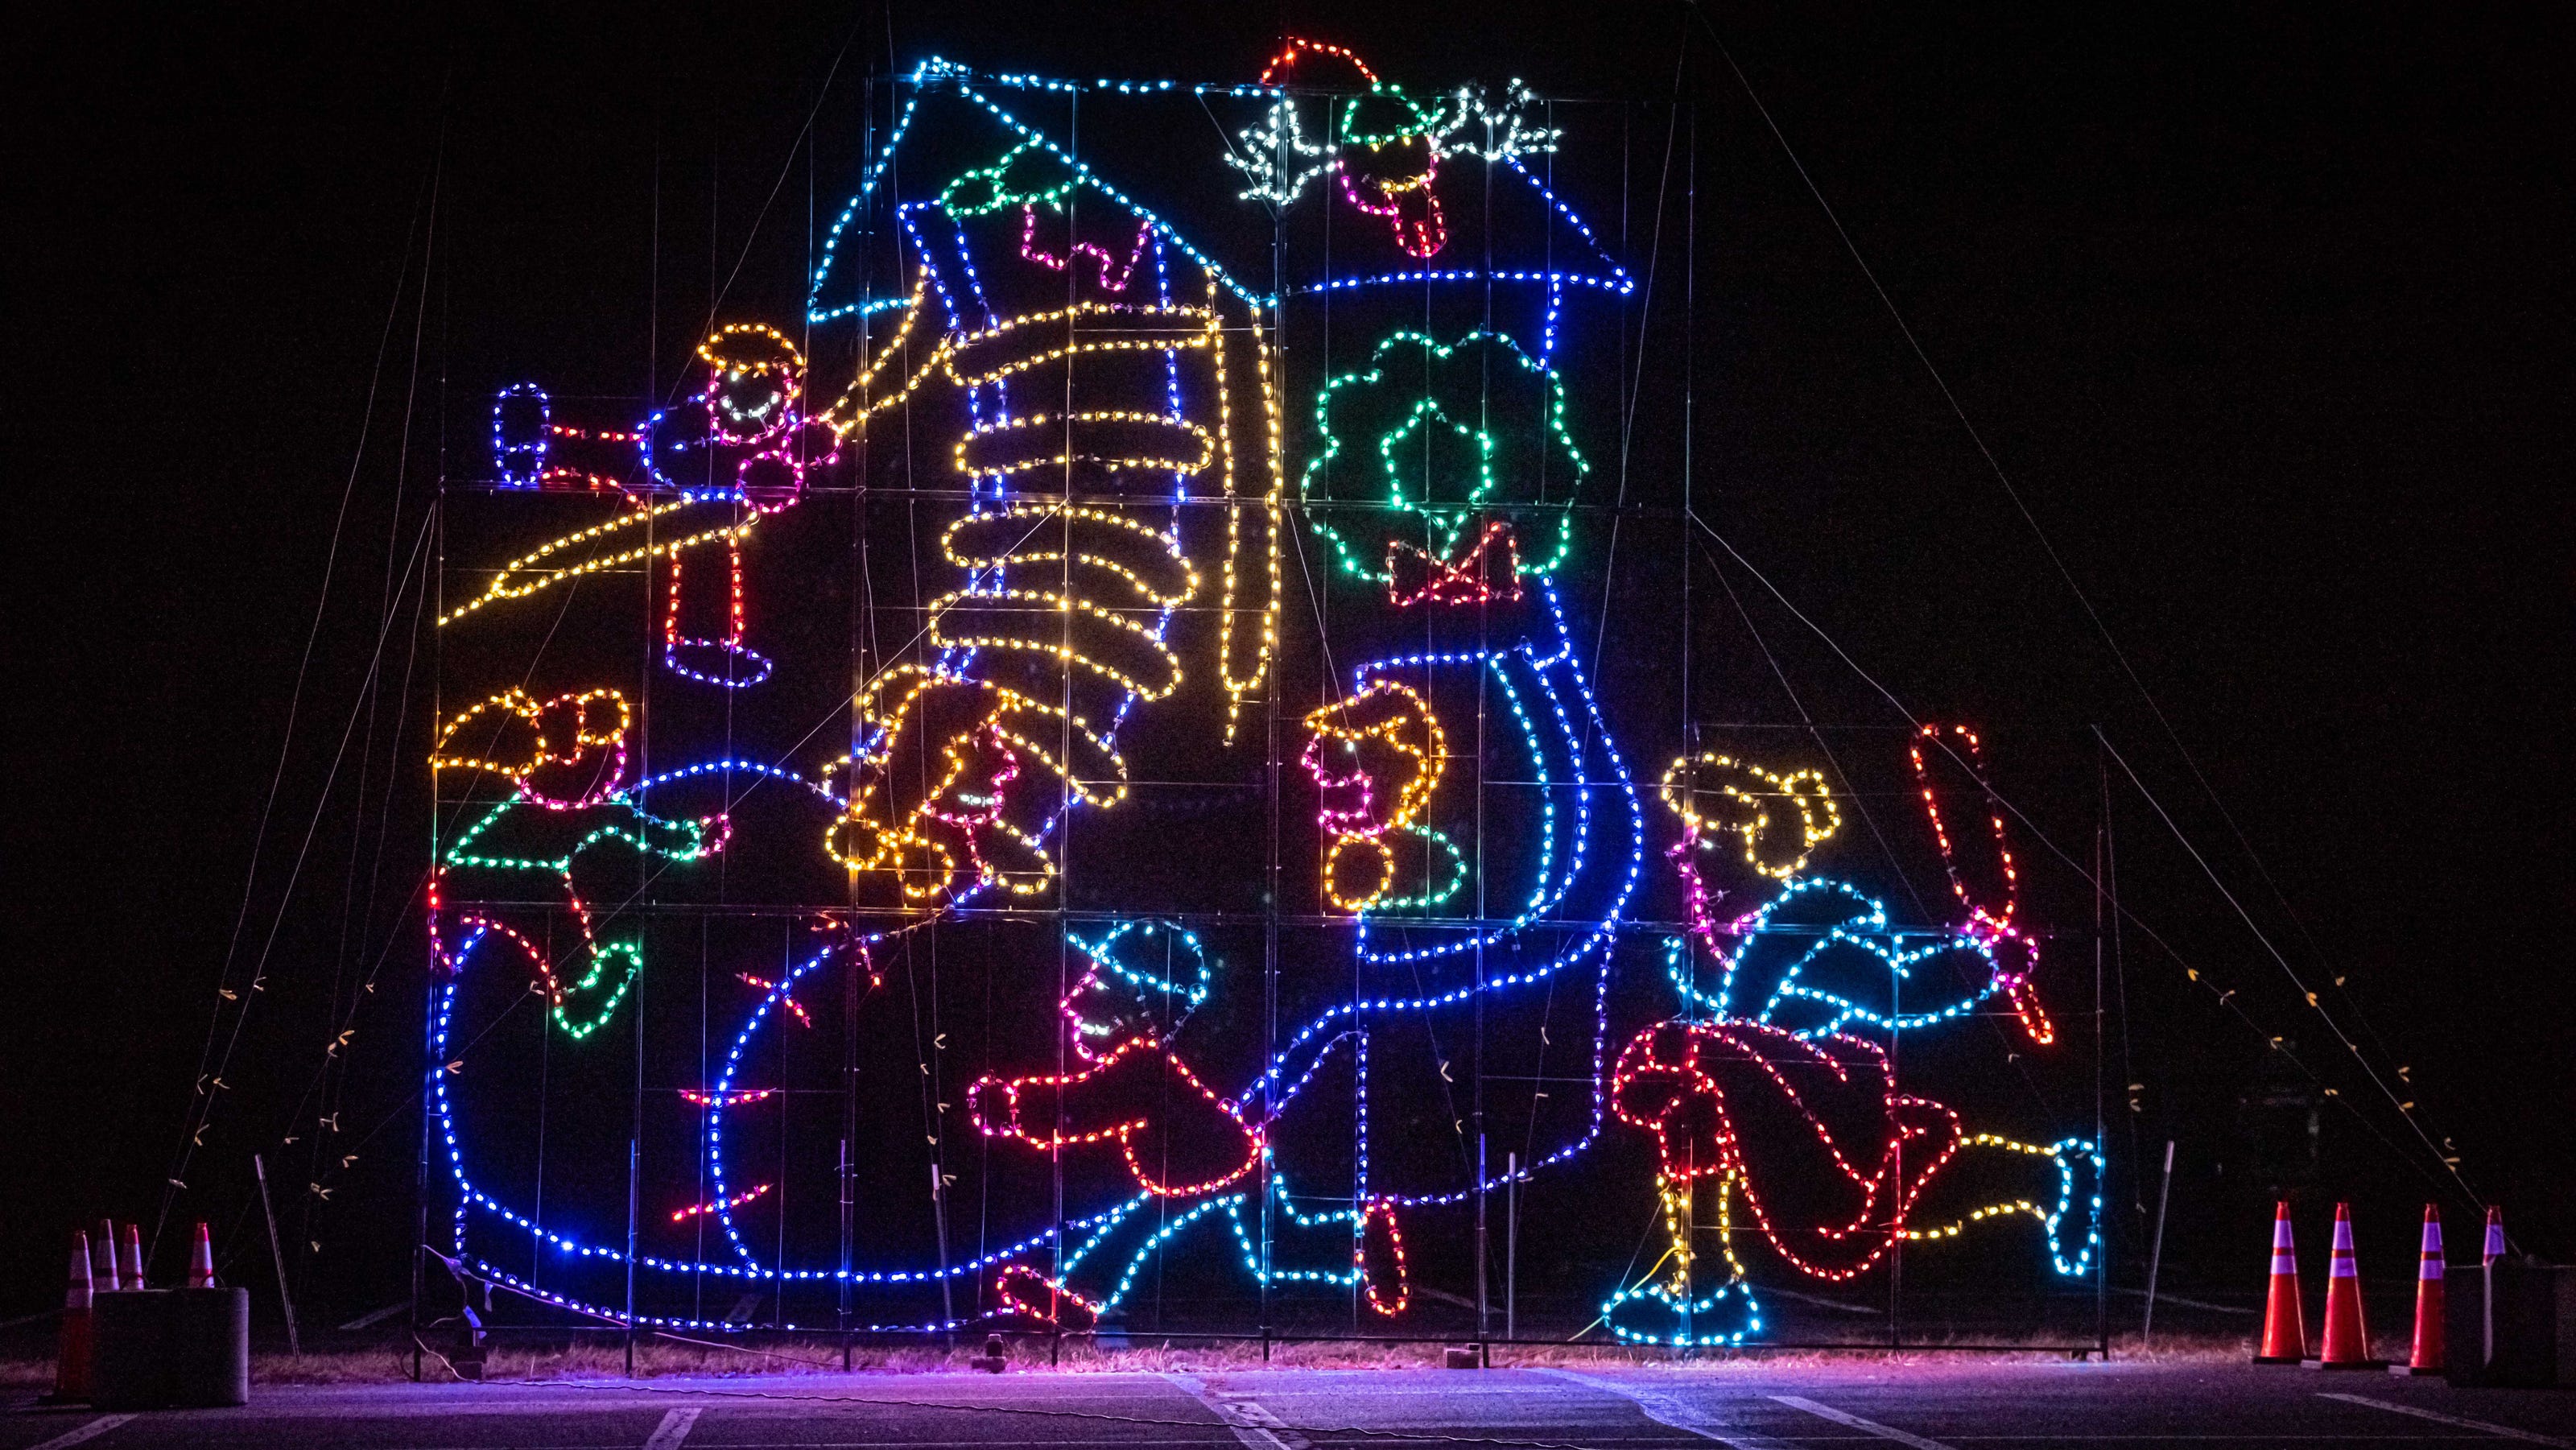 Magic of Lights holiday show returning to PNC in Holmdel NJ